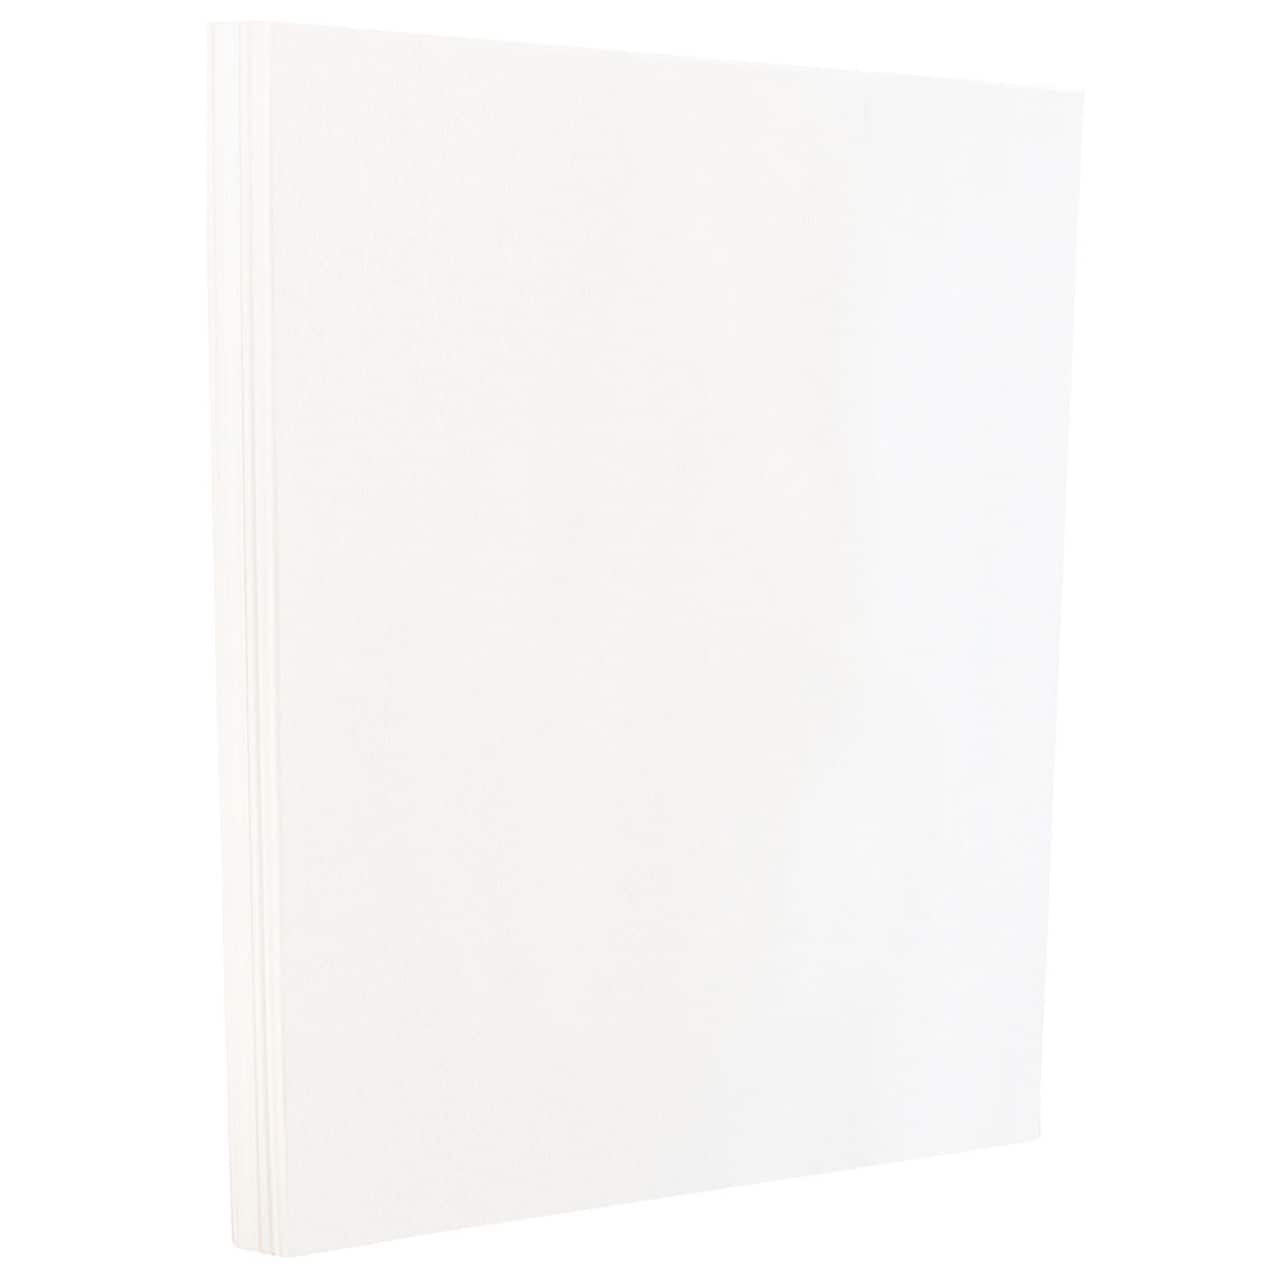 JAM Paper White Glossy 5 x 7 80lb. Cover Cardstock, 100 Sheets